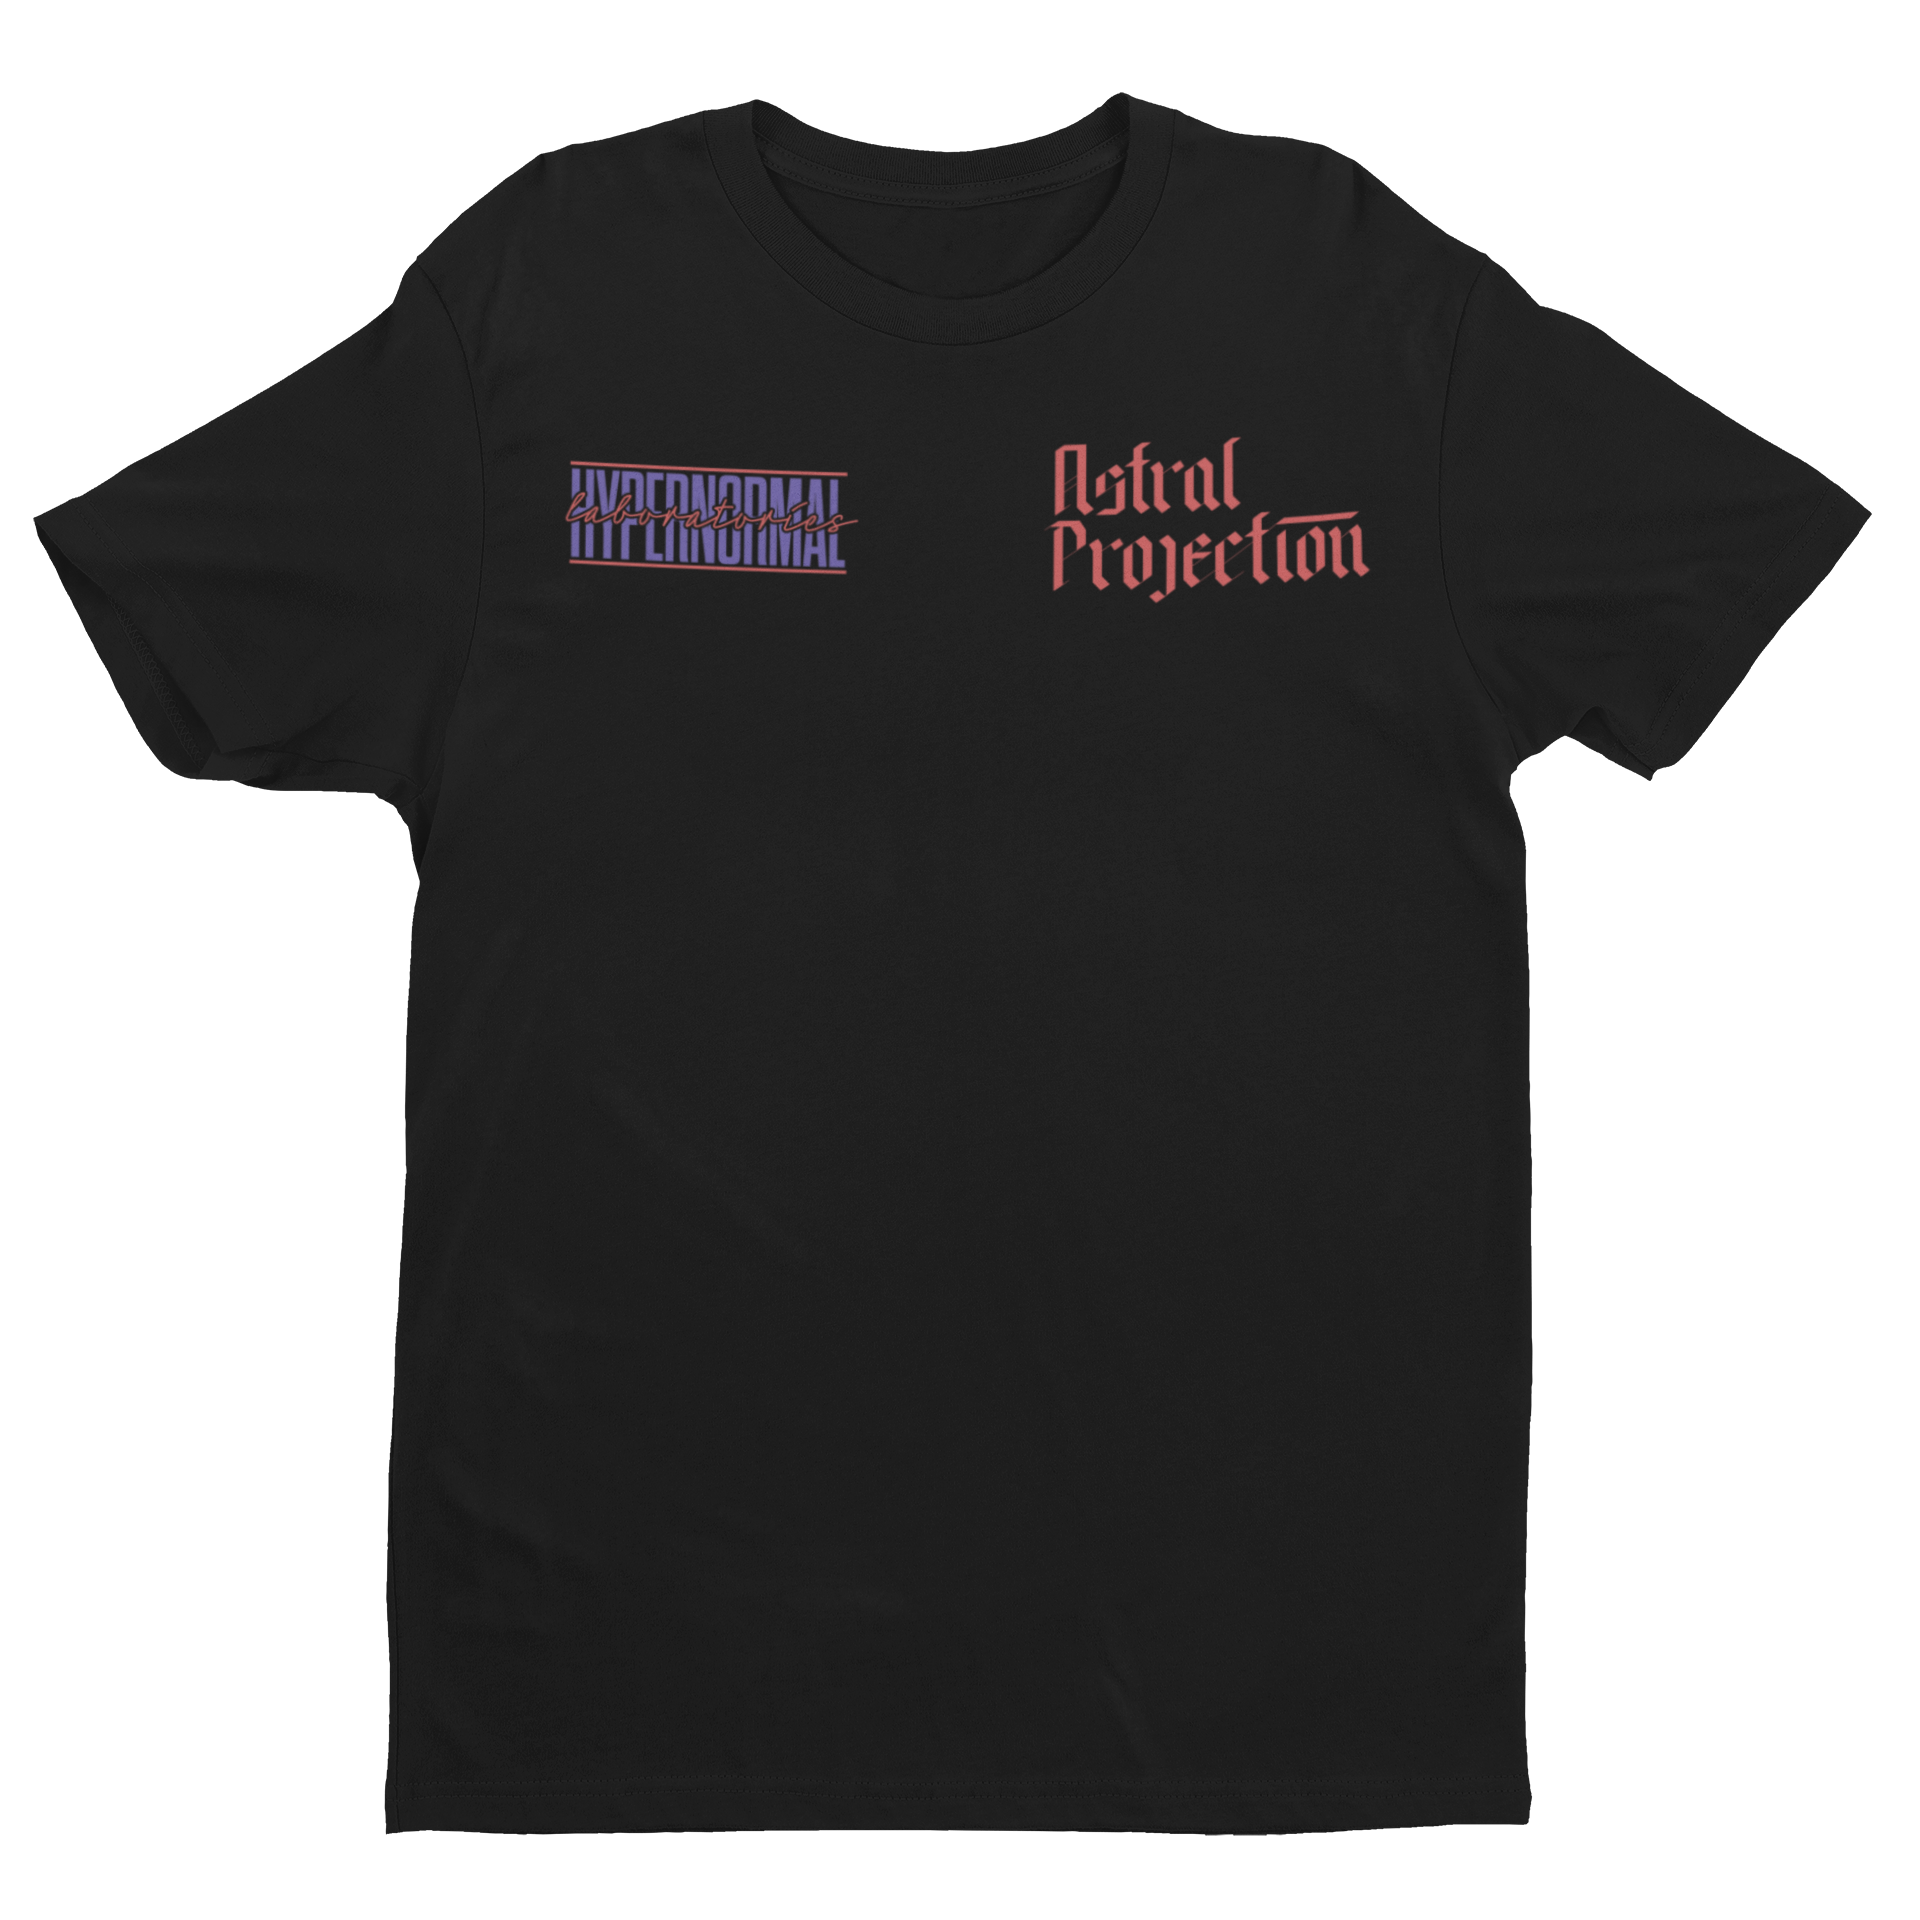 Astral Projection Tee